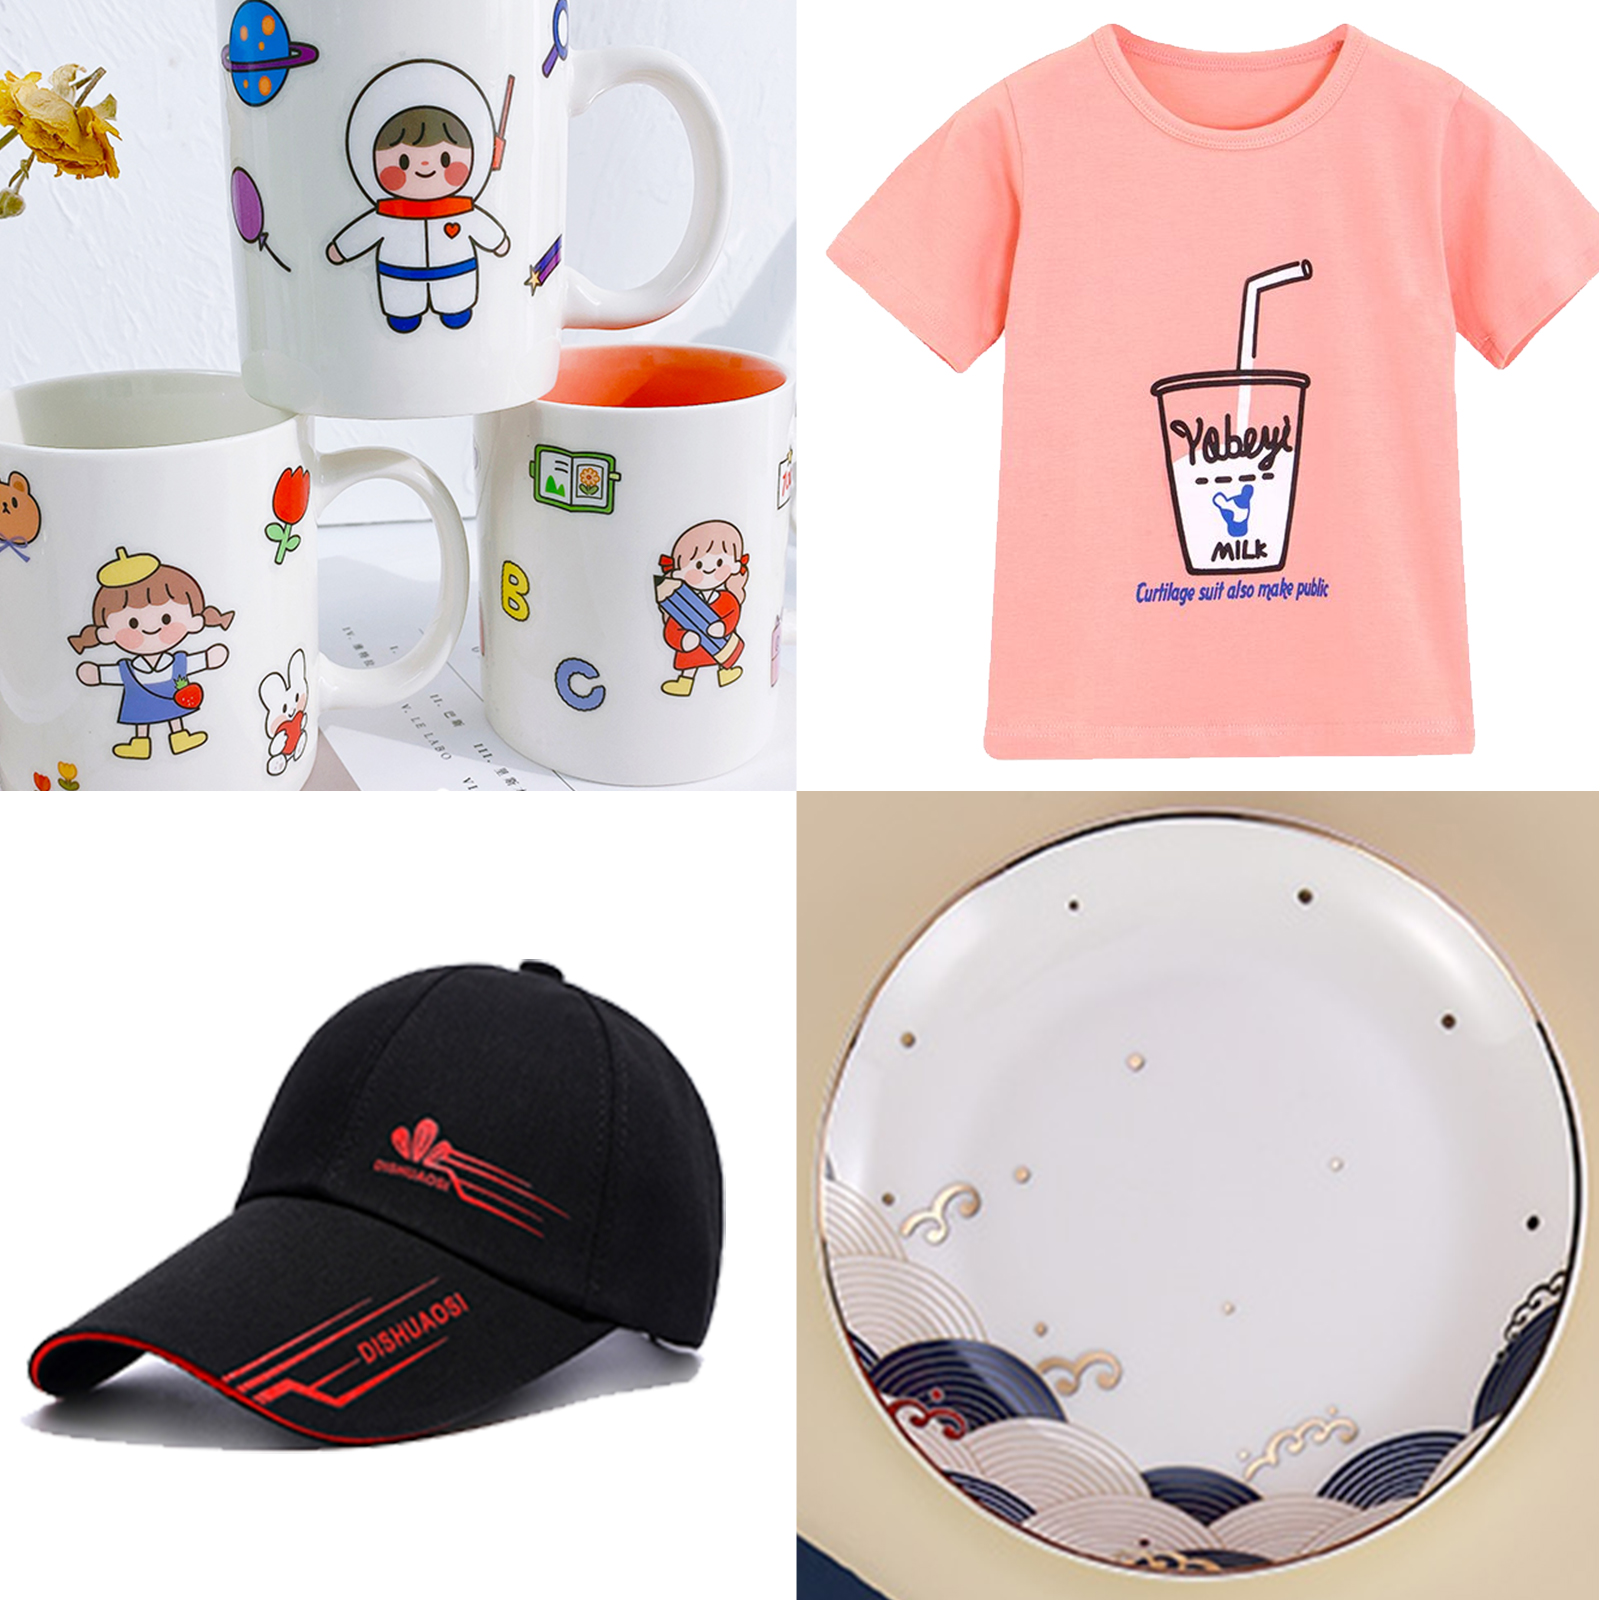  5 in 1 Heat Press Machine 12 X 15 Inch,Swing Away Heat Press  Transfer Sublimation for T Shirts Hat Mug Cap Plate, 360 Degree : Arts,  Crafts & Sewing